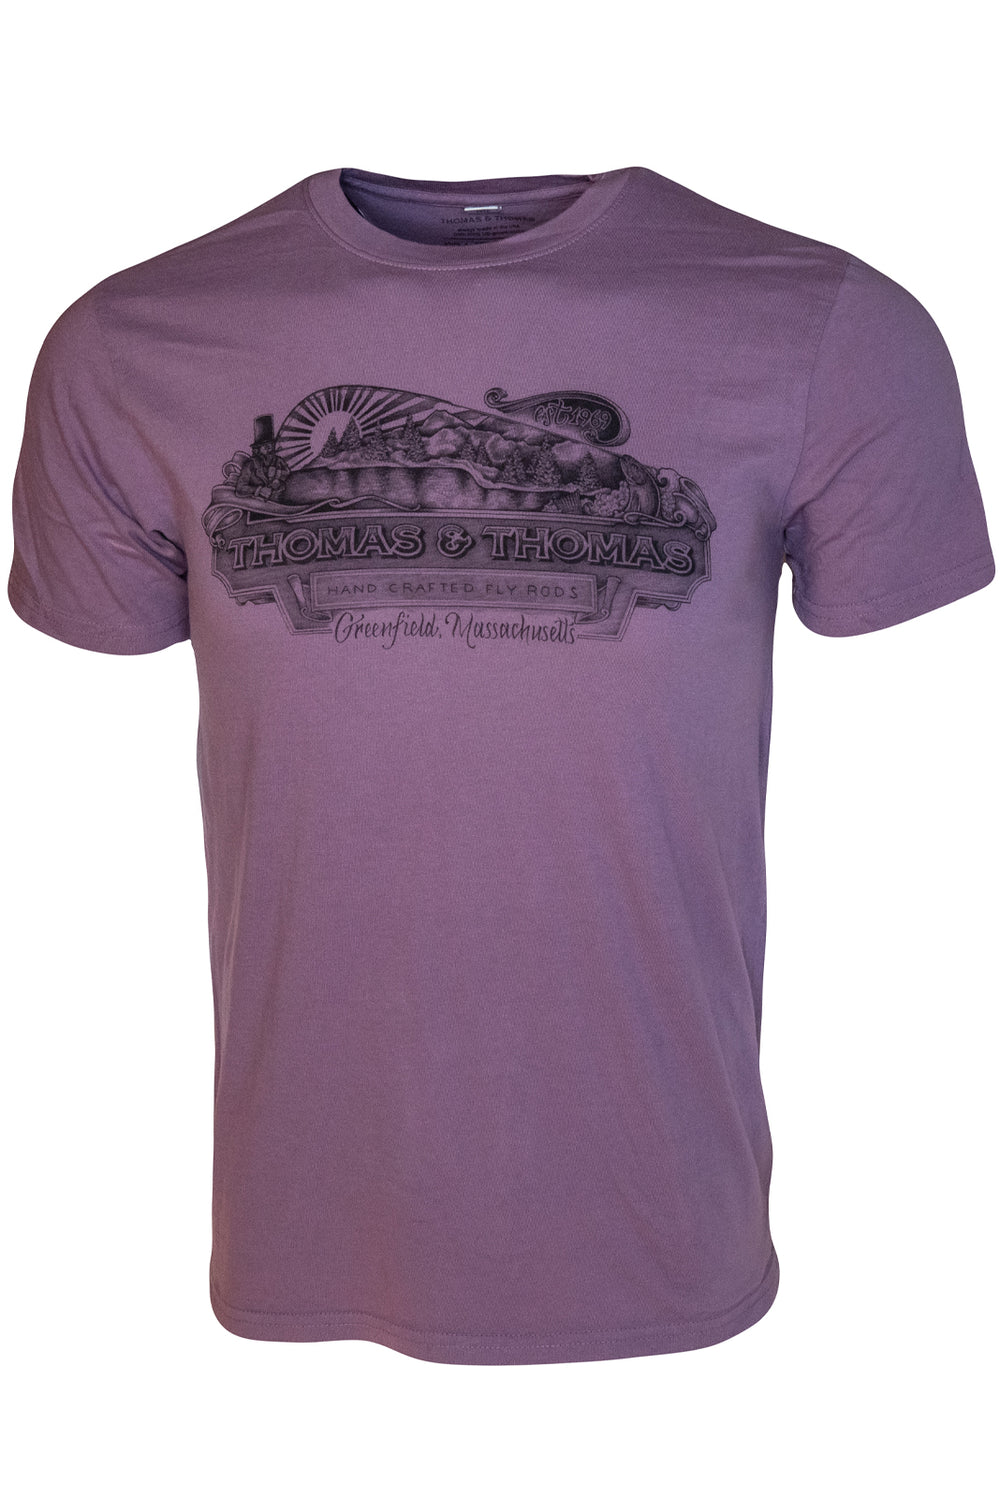 Greenfield Vintage T-Shirt - Scotch Thistle